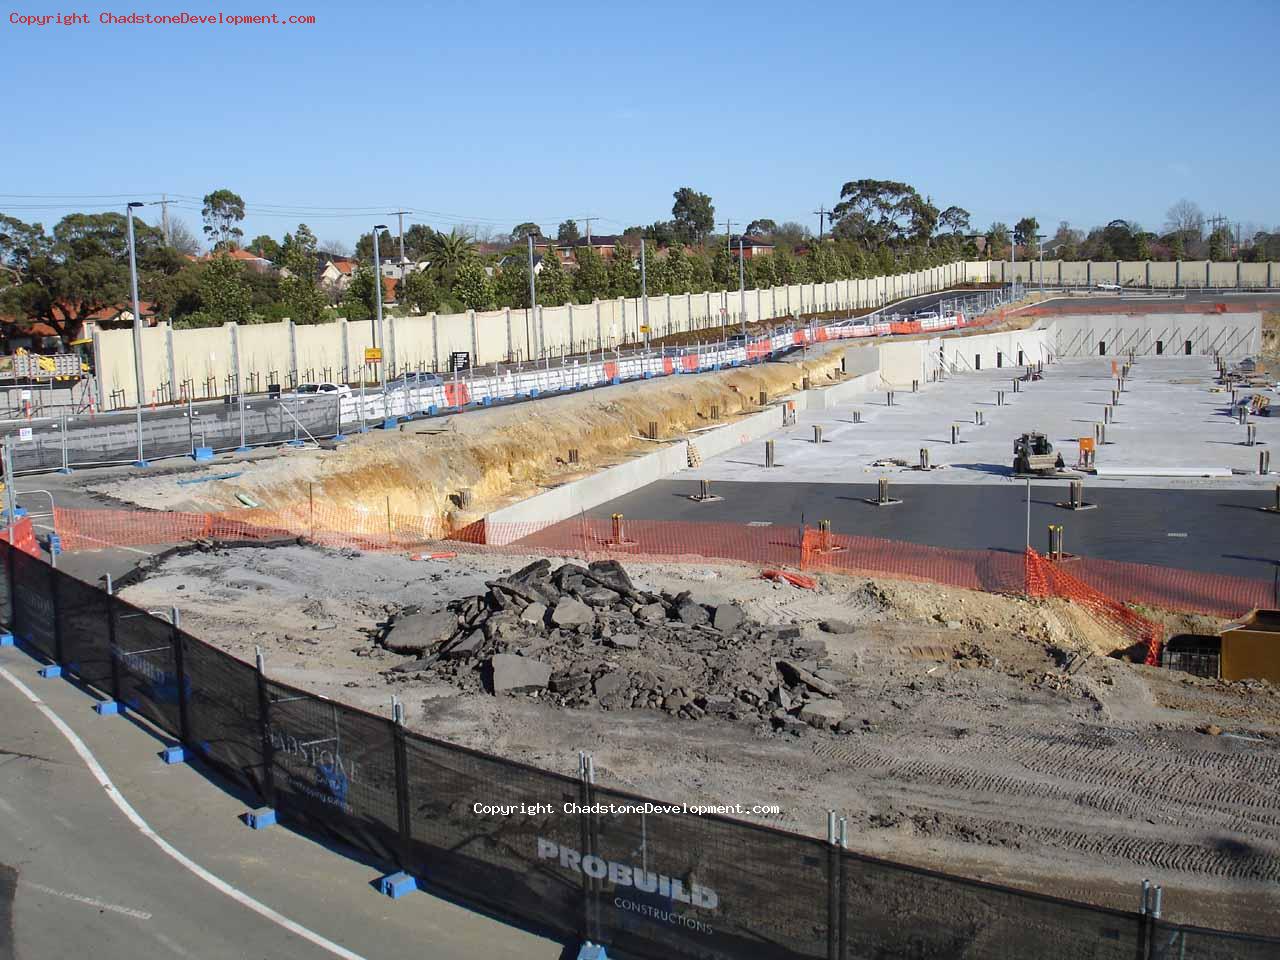 Pile of old bitumen next to new carpark - Chadstone Development Discussions